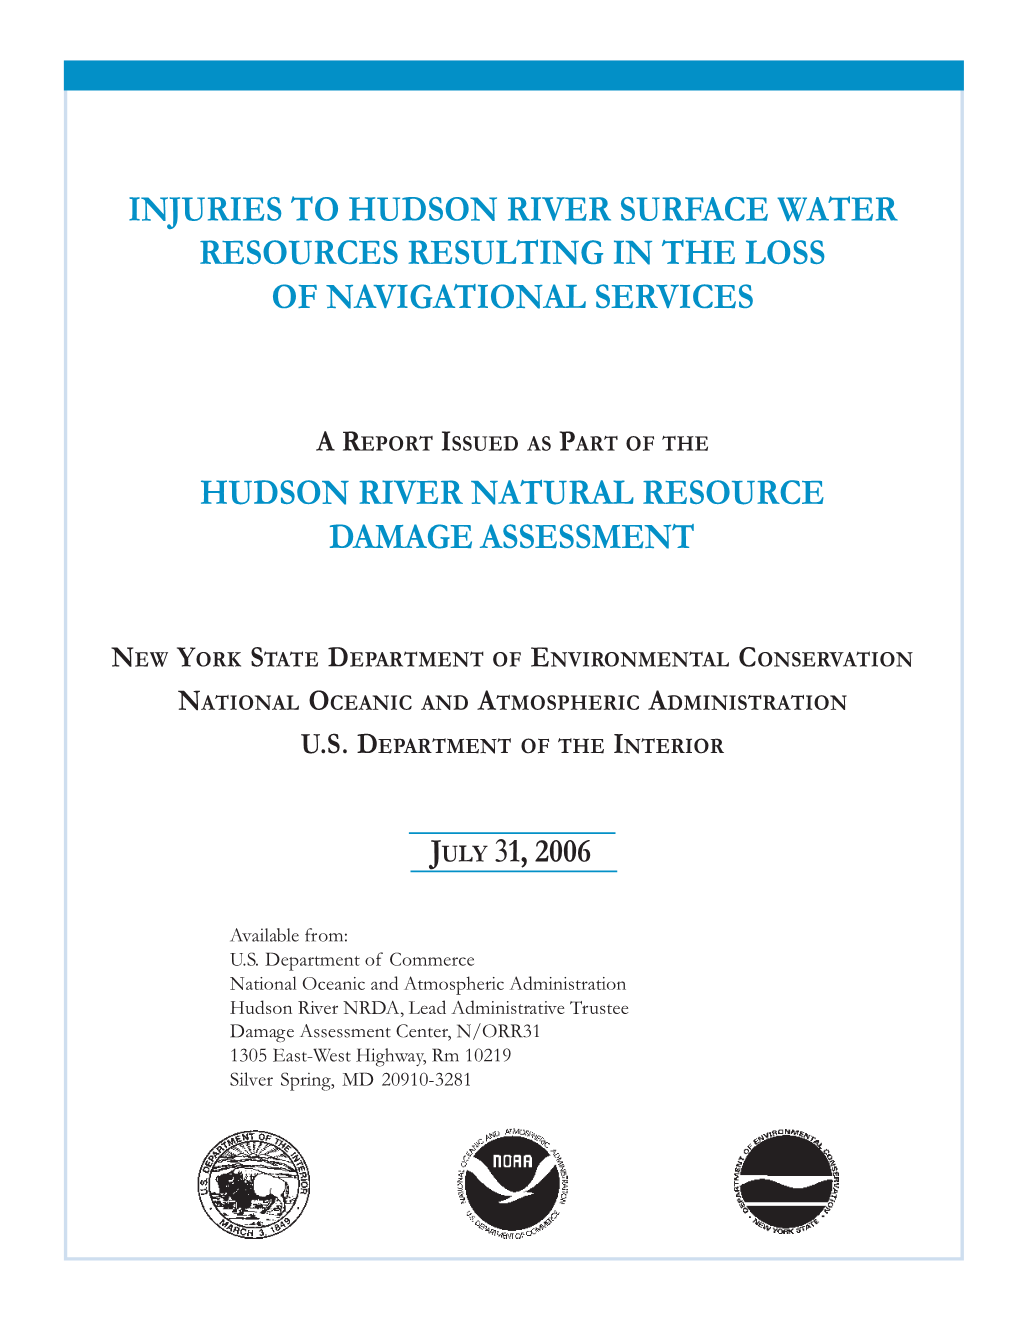 Injuries to Hudson River Surface Water Resources Resulting in Loss Of